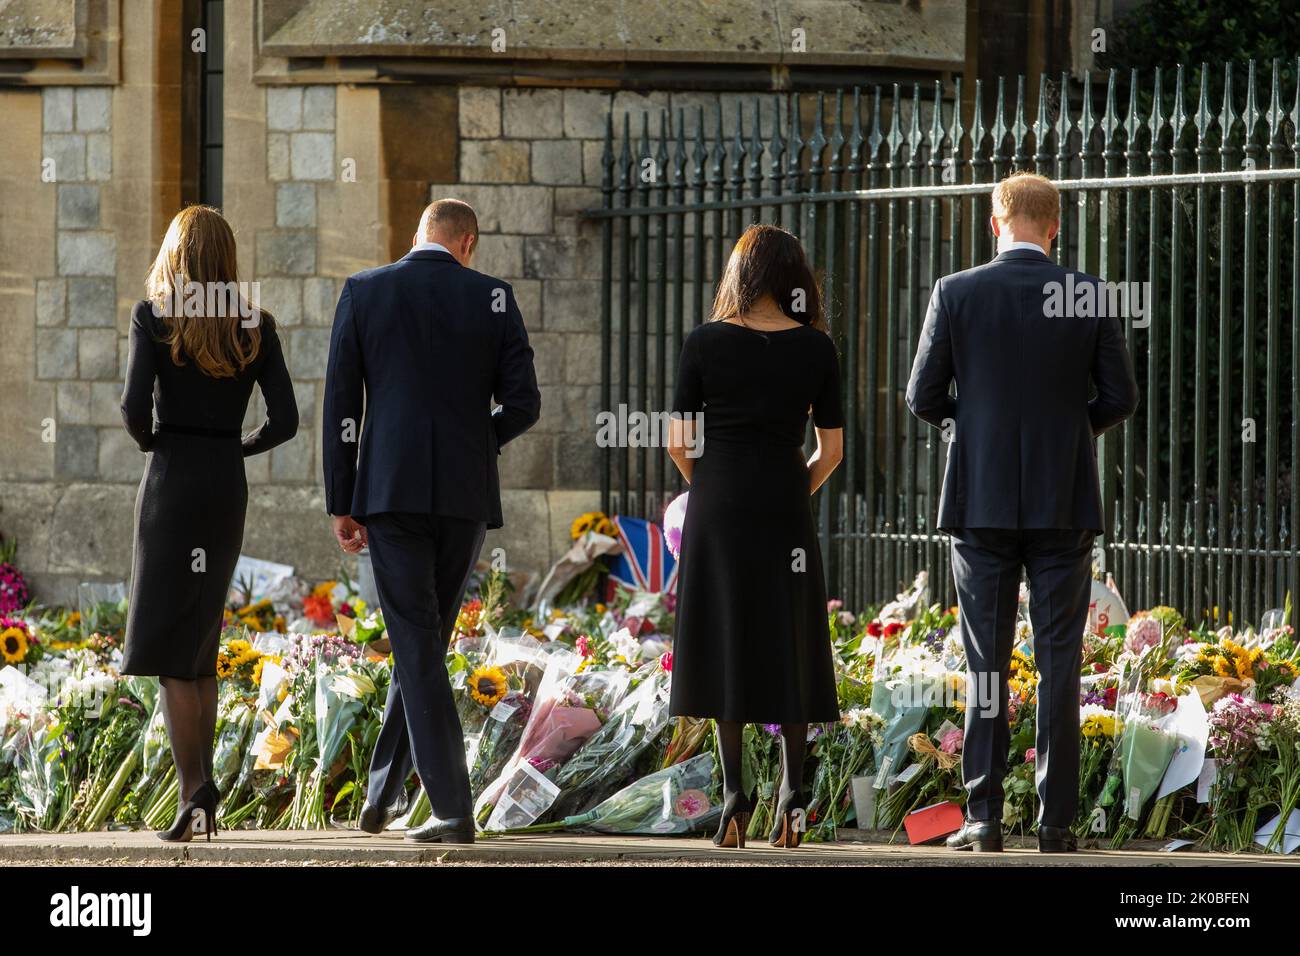 Windsor, UK. 10th September, 2022. Prince William and Catherine, the new Prince and Princess of Wales, accompanied by Prince Harry and Meghan, the Duke and Duchess of Sussex, view floral tributes laid outside Cambridge Gate at Windsor Castle following the death of Queen Elizabeth II. Queen Elizabeth II, the UK's longest-serving monarch, died at Balmoral aged 96 on 8th September 2022 after a reign lasting 70 years. Credit: Mark Kerrison/Alamy Live News Stock Photo